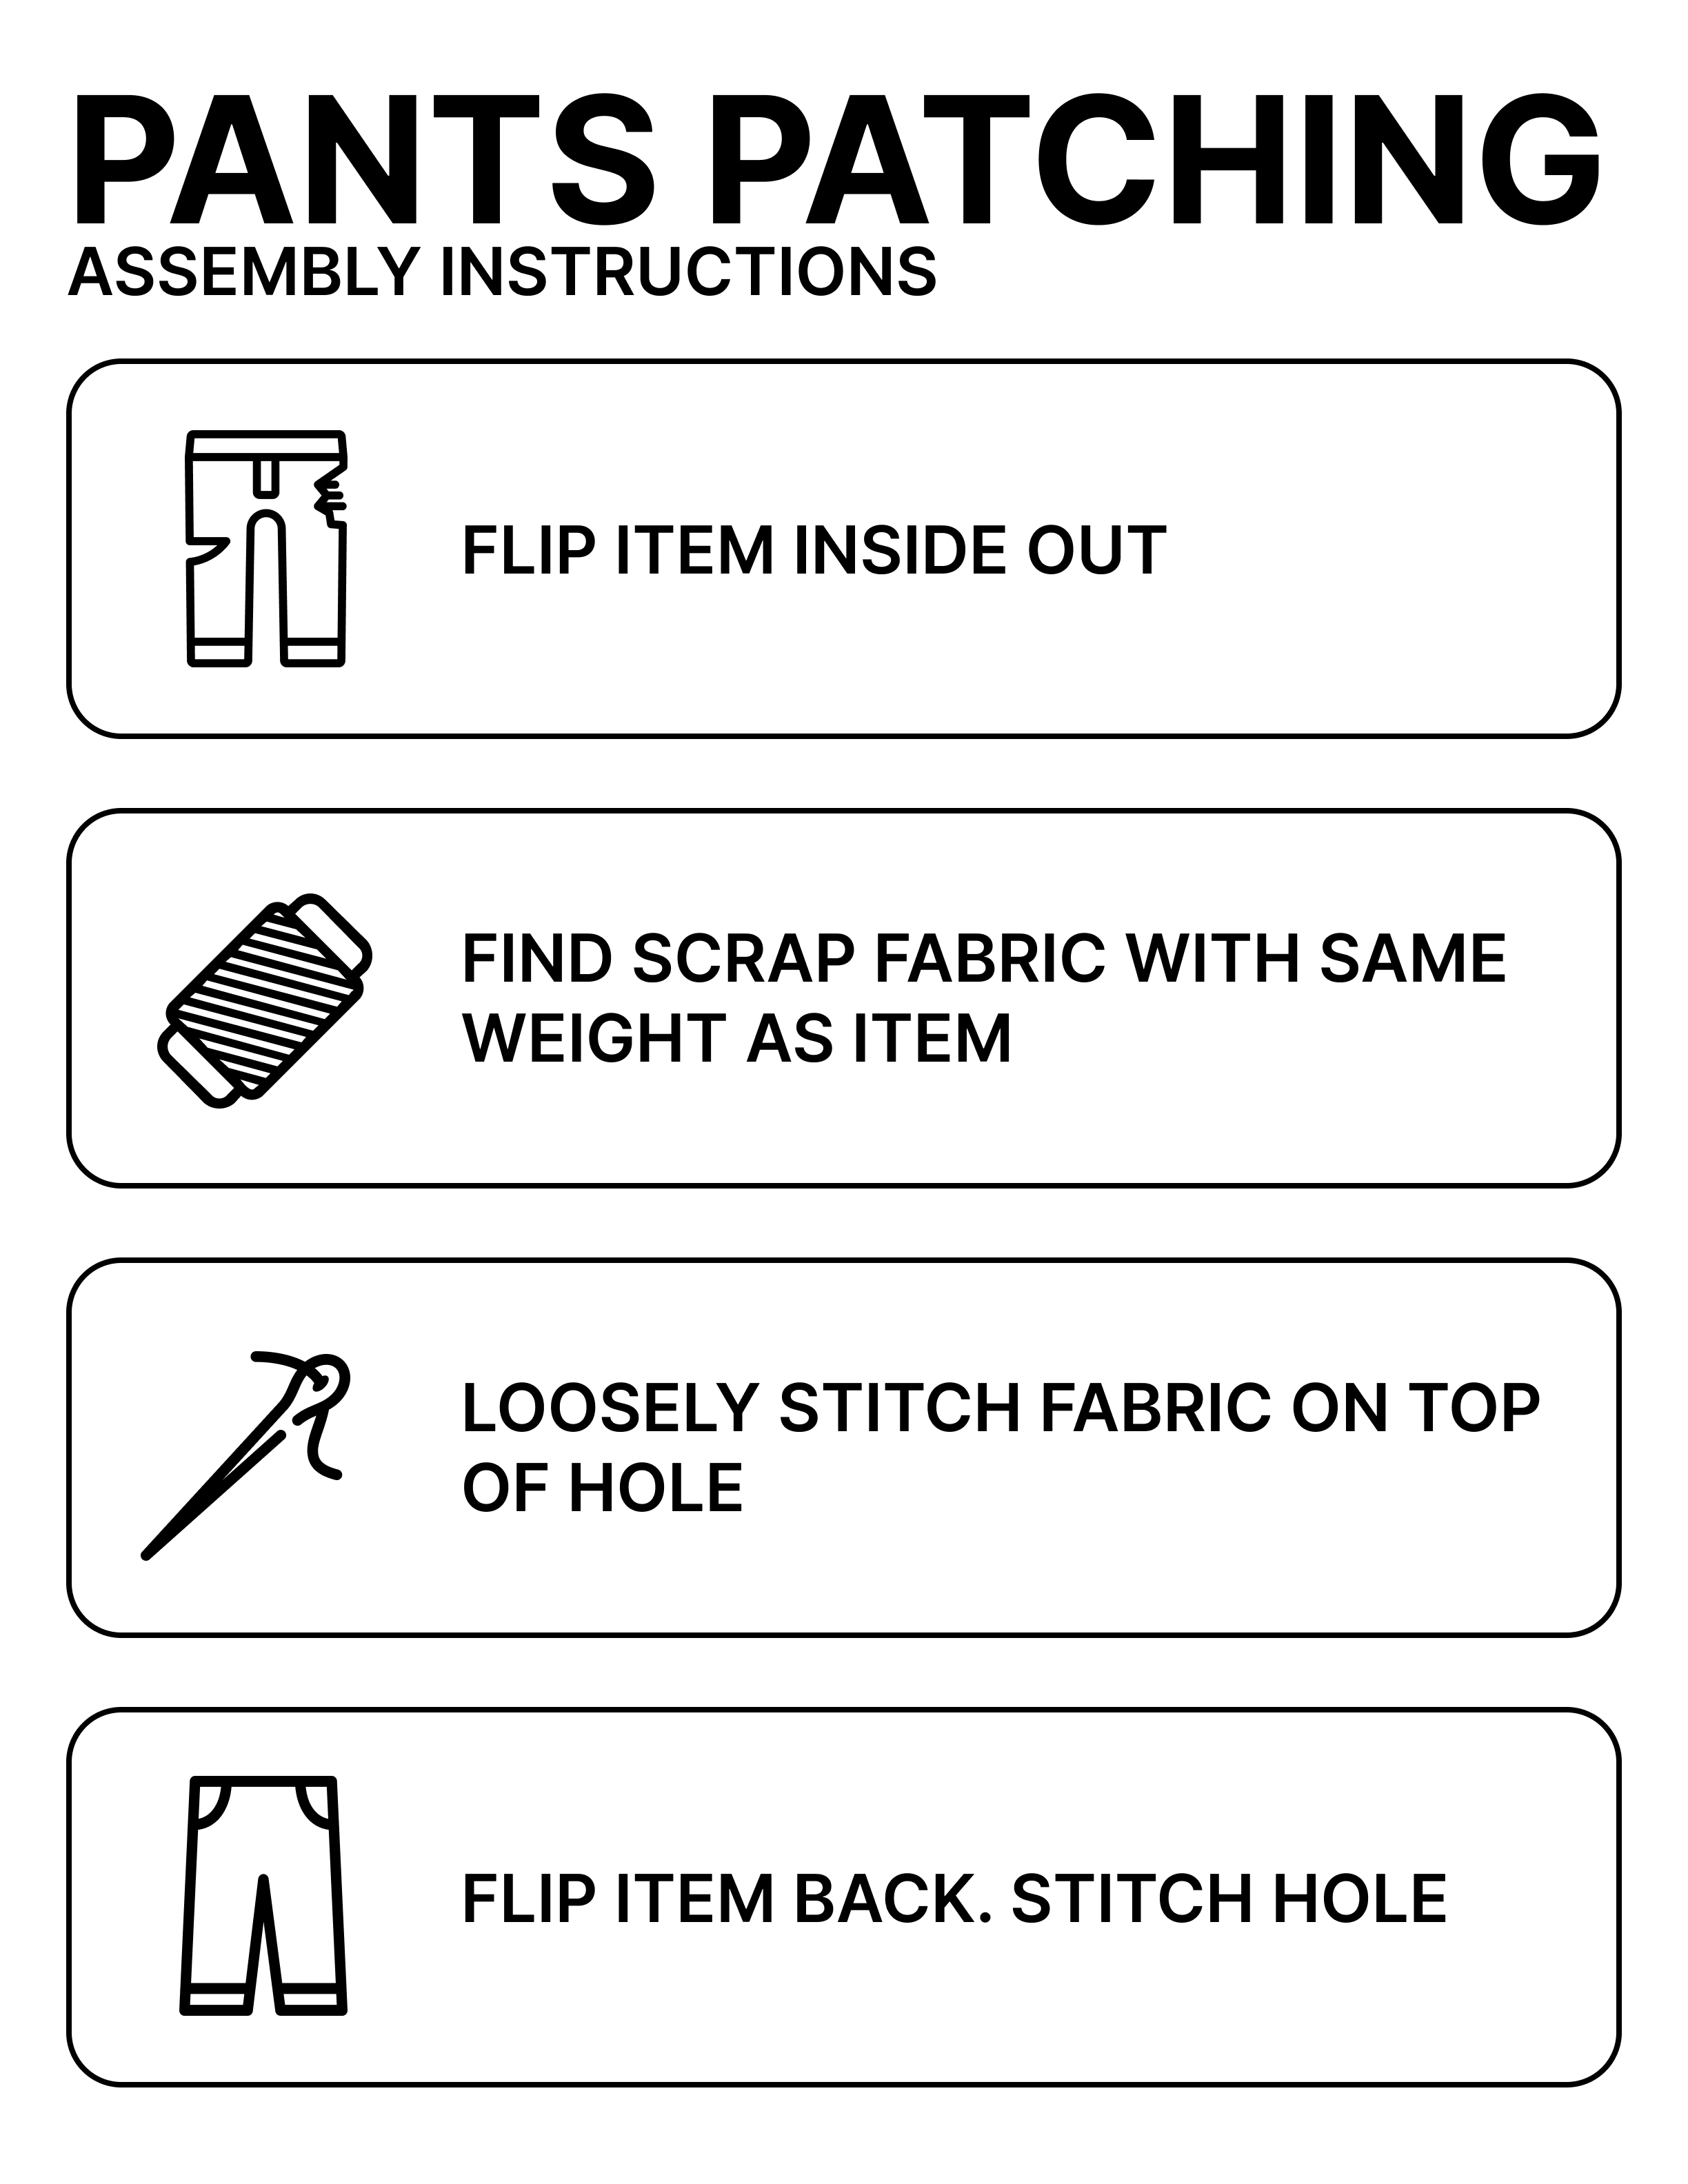 Step by step instructions to patch a pant